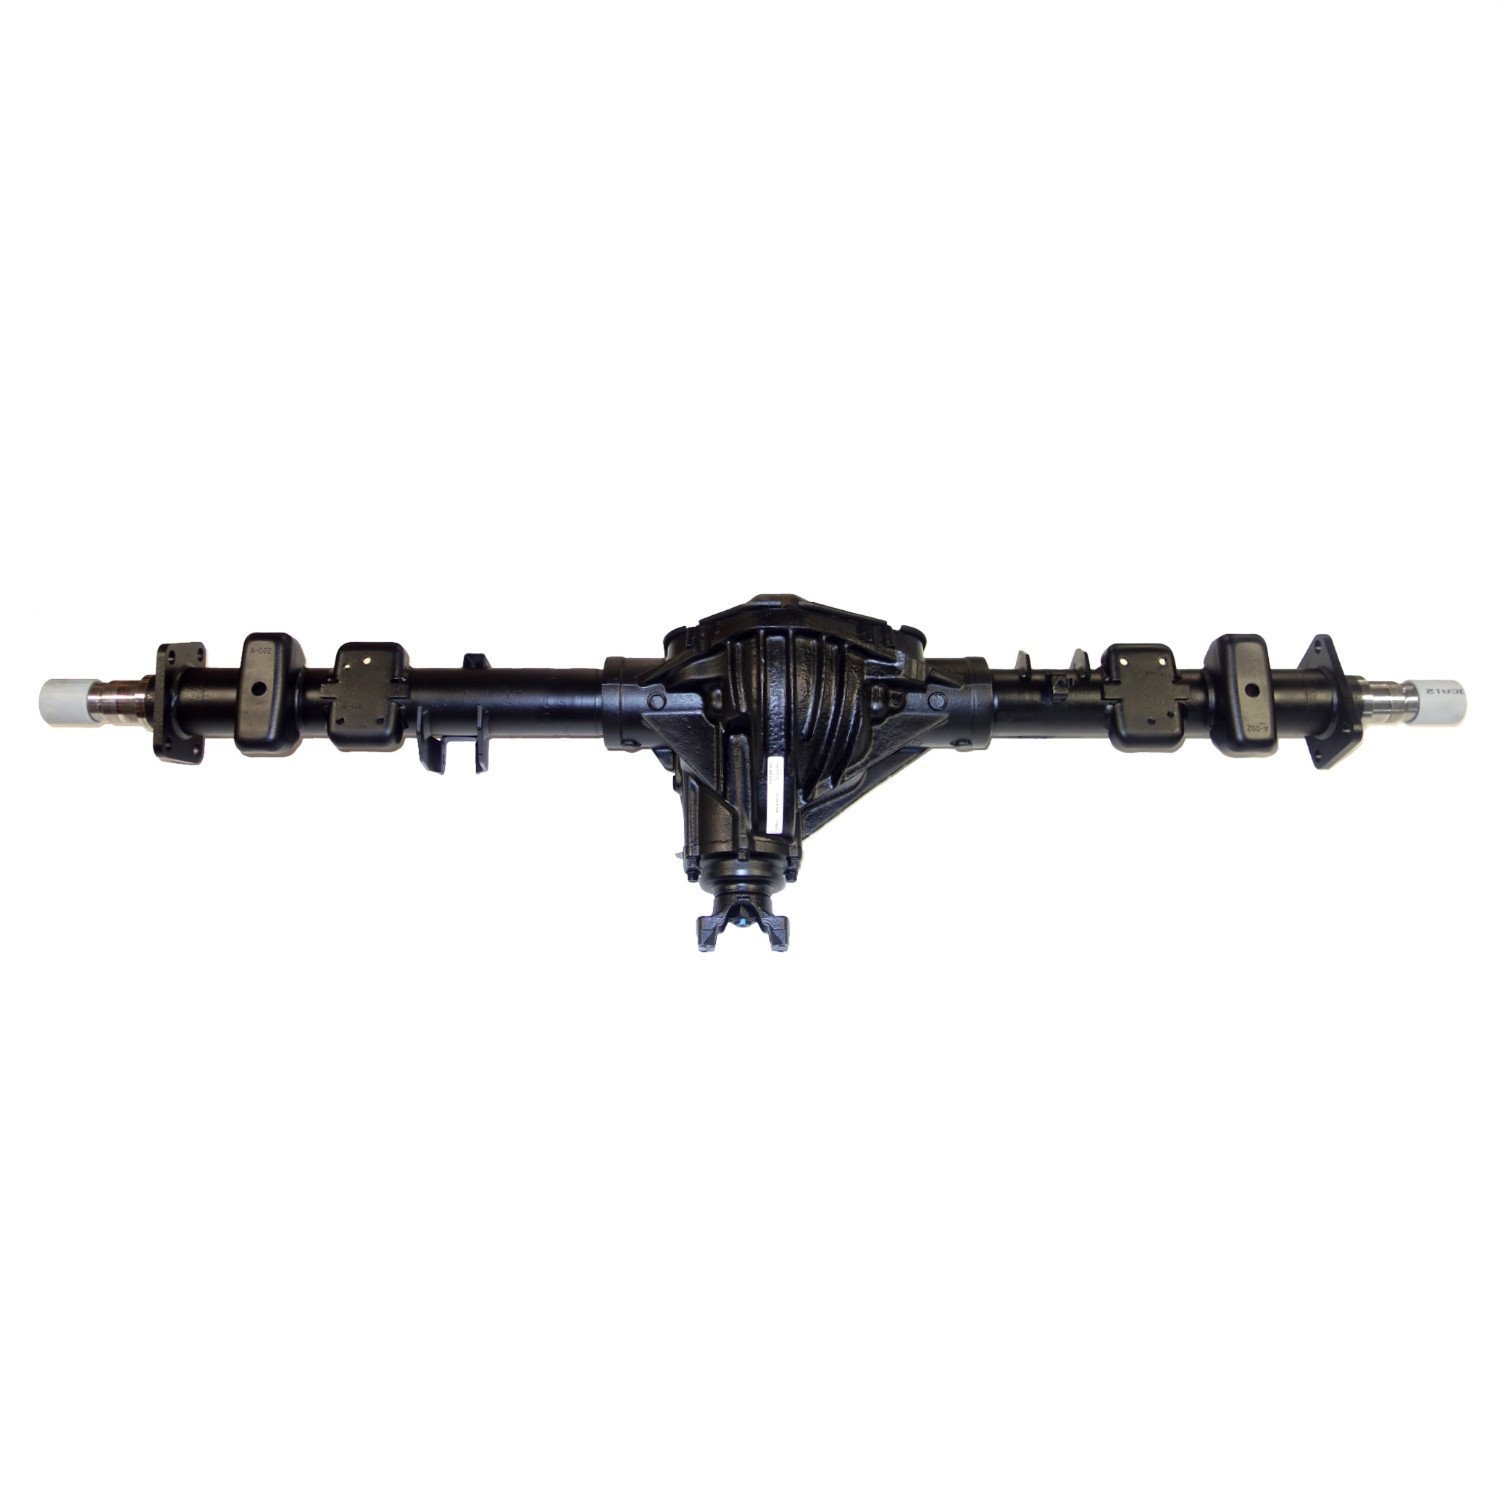 Remanufactured Axle Assy for GM 14 Bolt Truck 90-00 GM 3500 Pickup 3.73 , 2wd, SRW